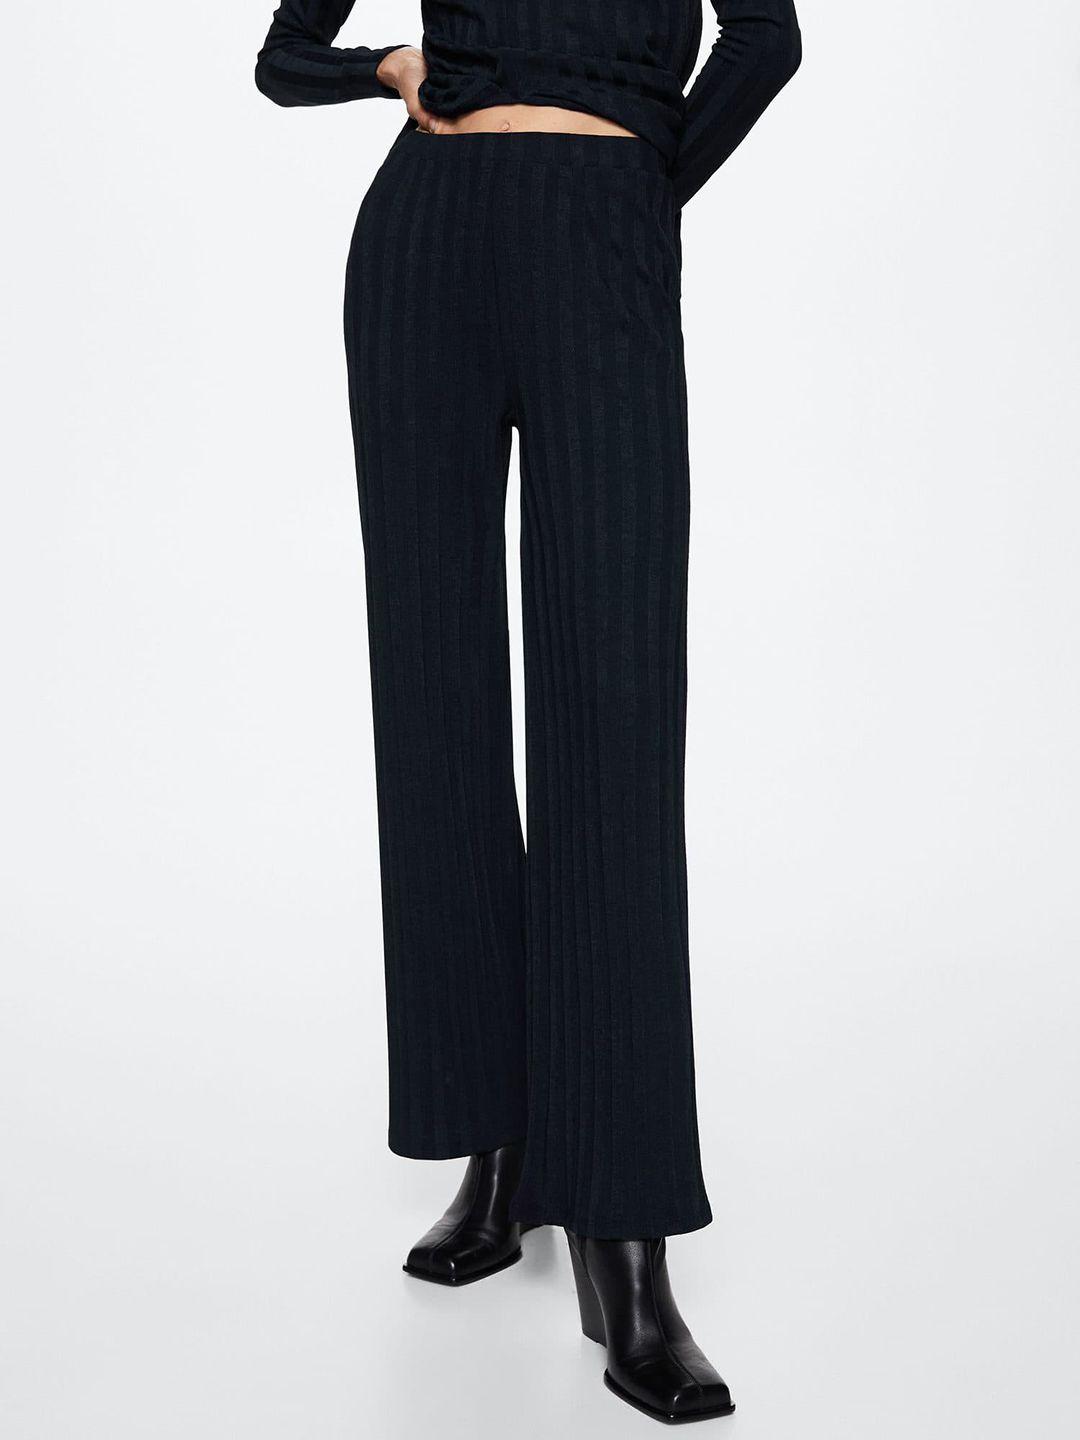 mango women navy blue striped flared sustainable trousers